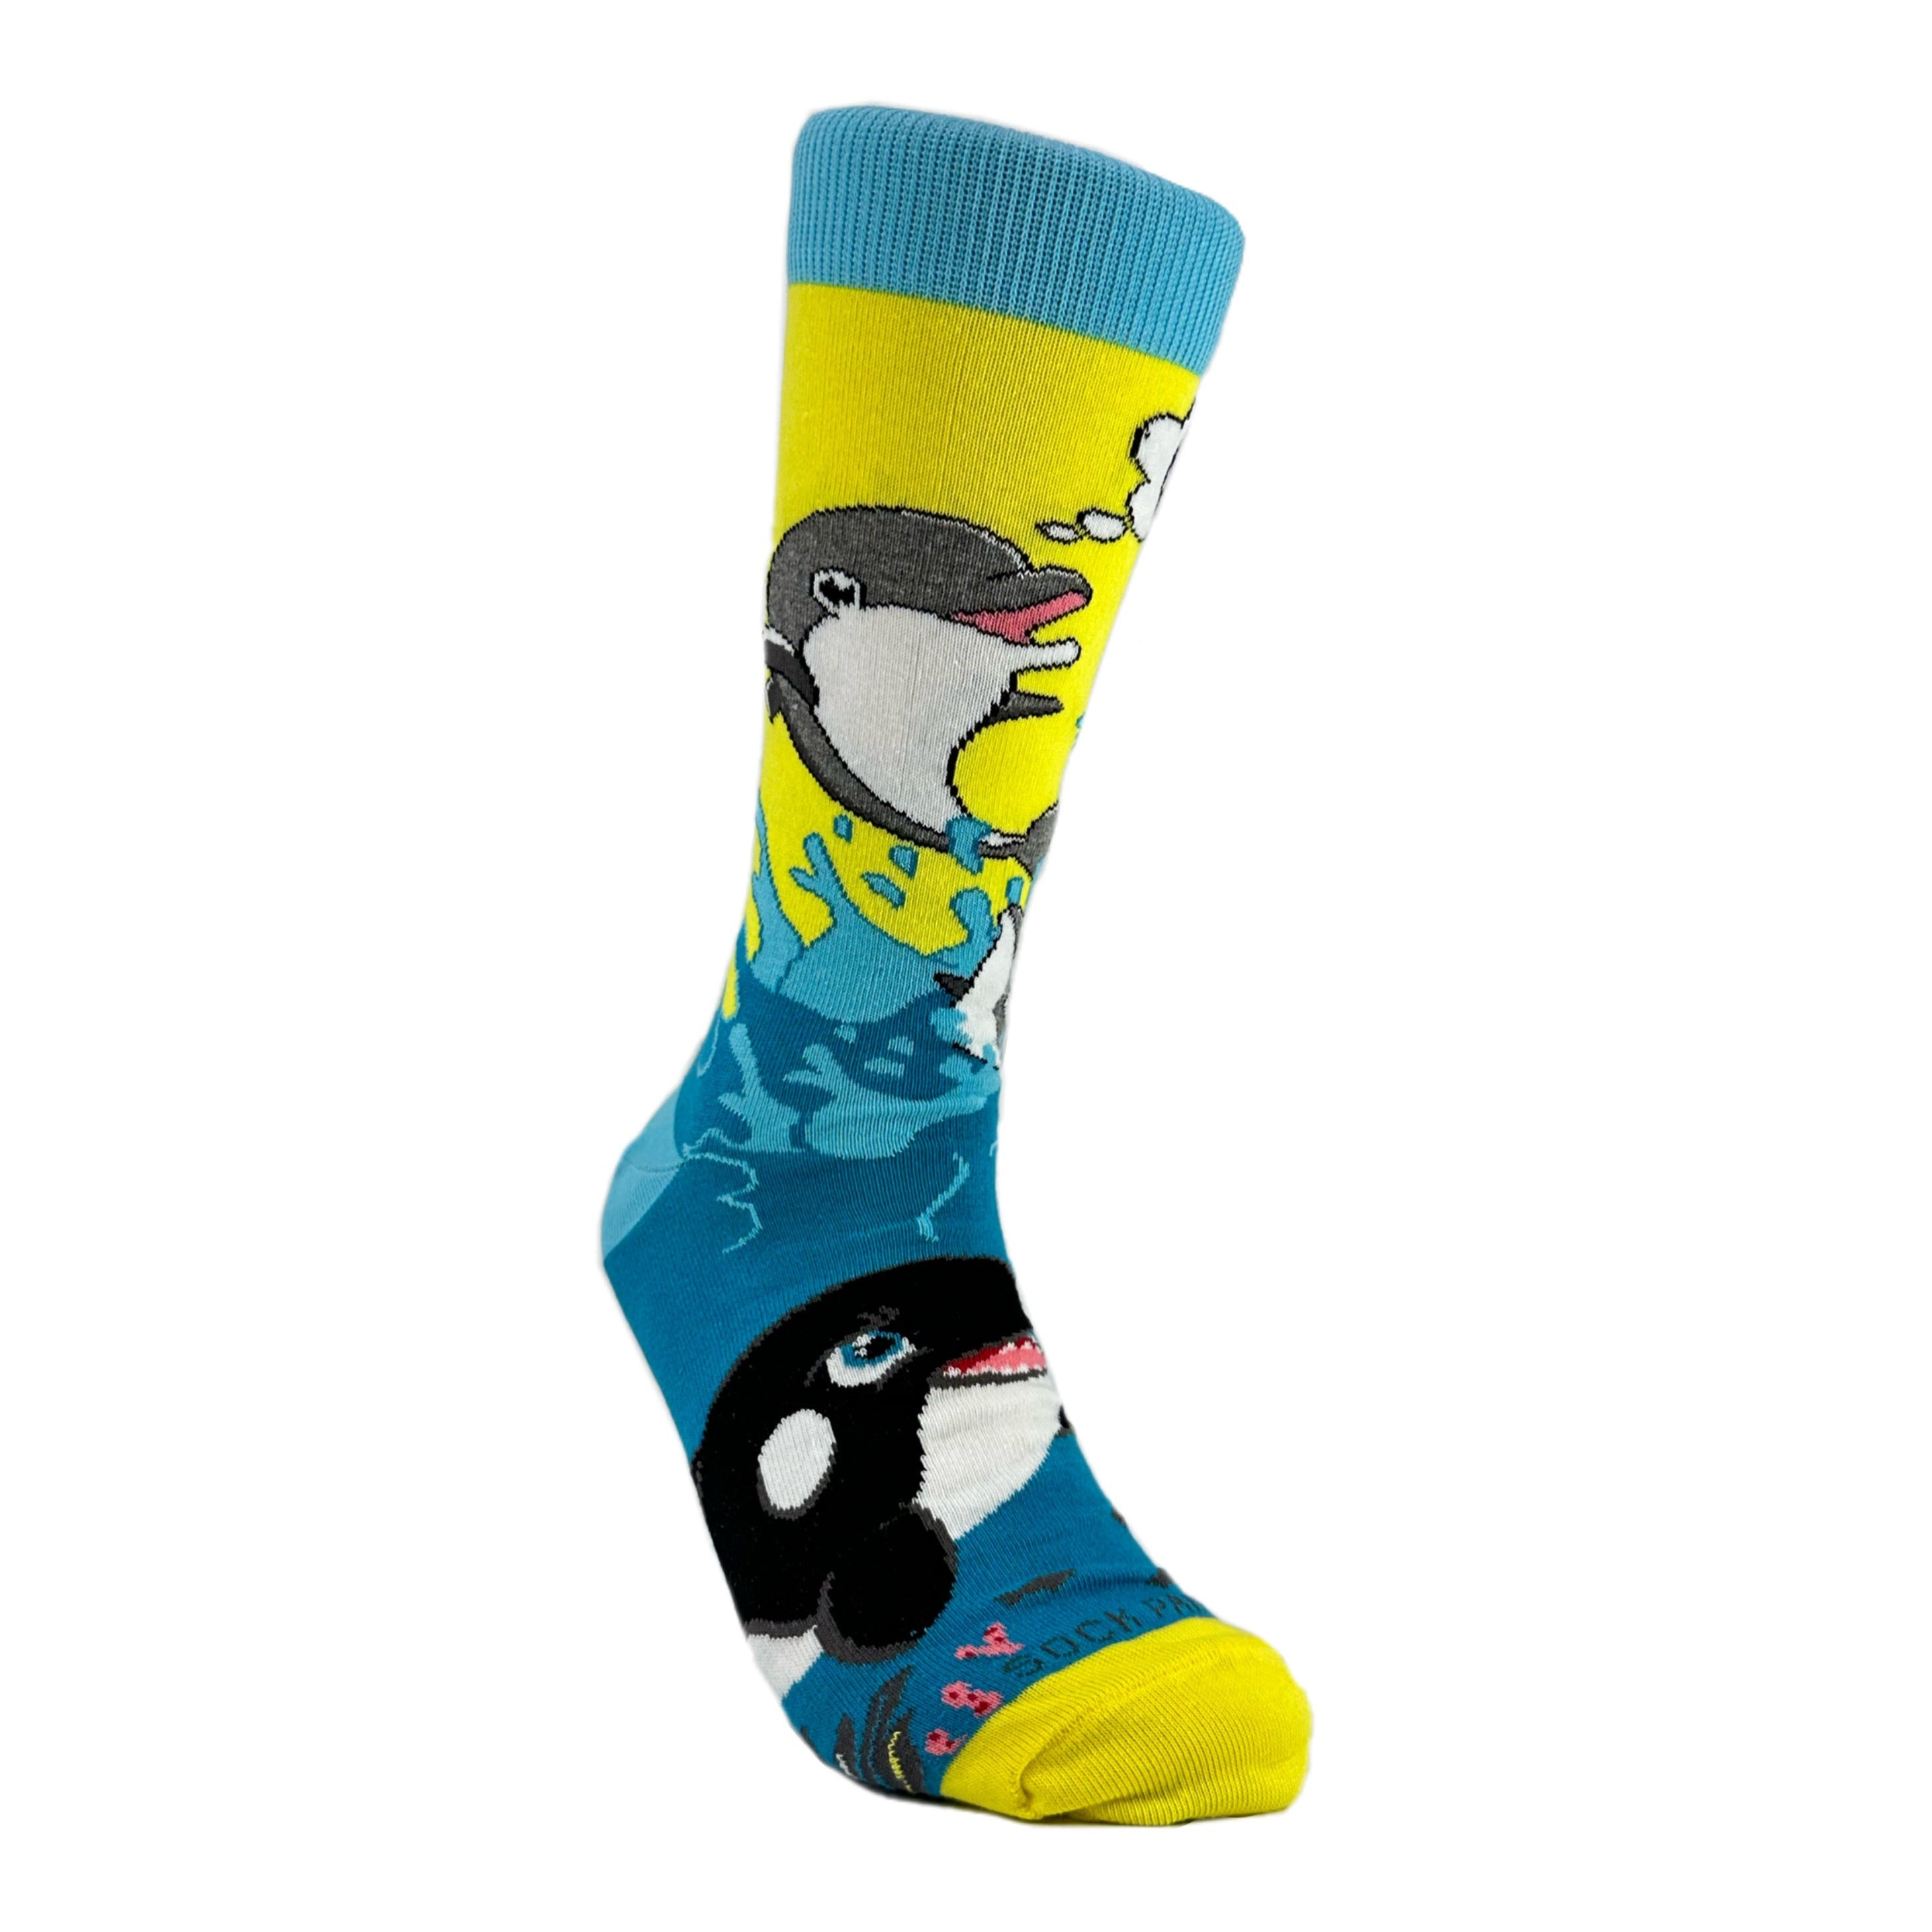 Dolphins and Soccer Socks from the Sock Panda (Adult Large)